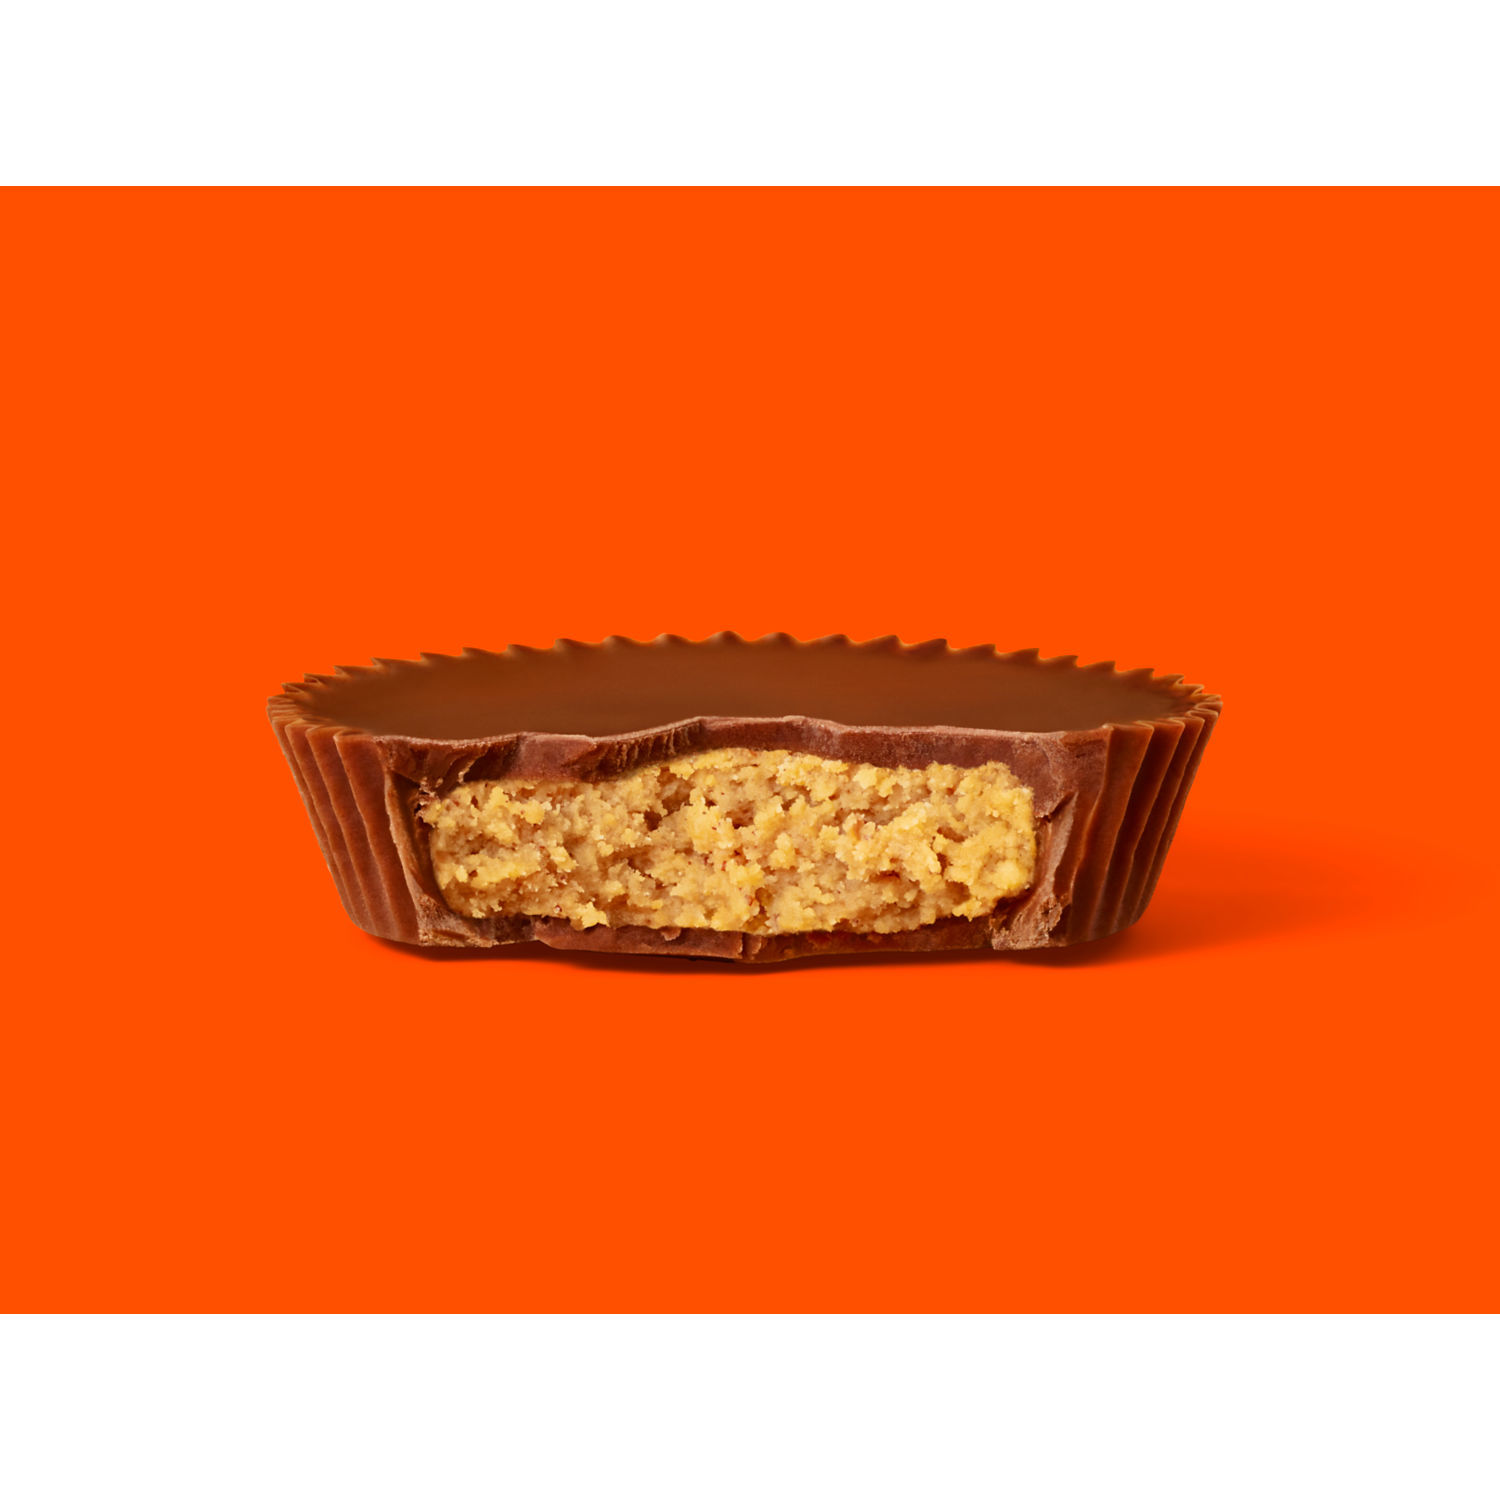 Reese's Milk Chocolate Peanut Butter Cups Candy, Packs 1.5 oz, 6 Count - image 4 of 9